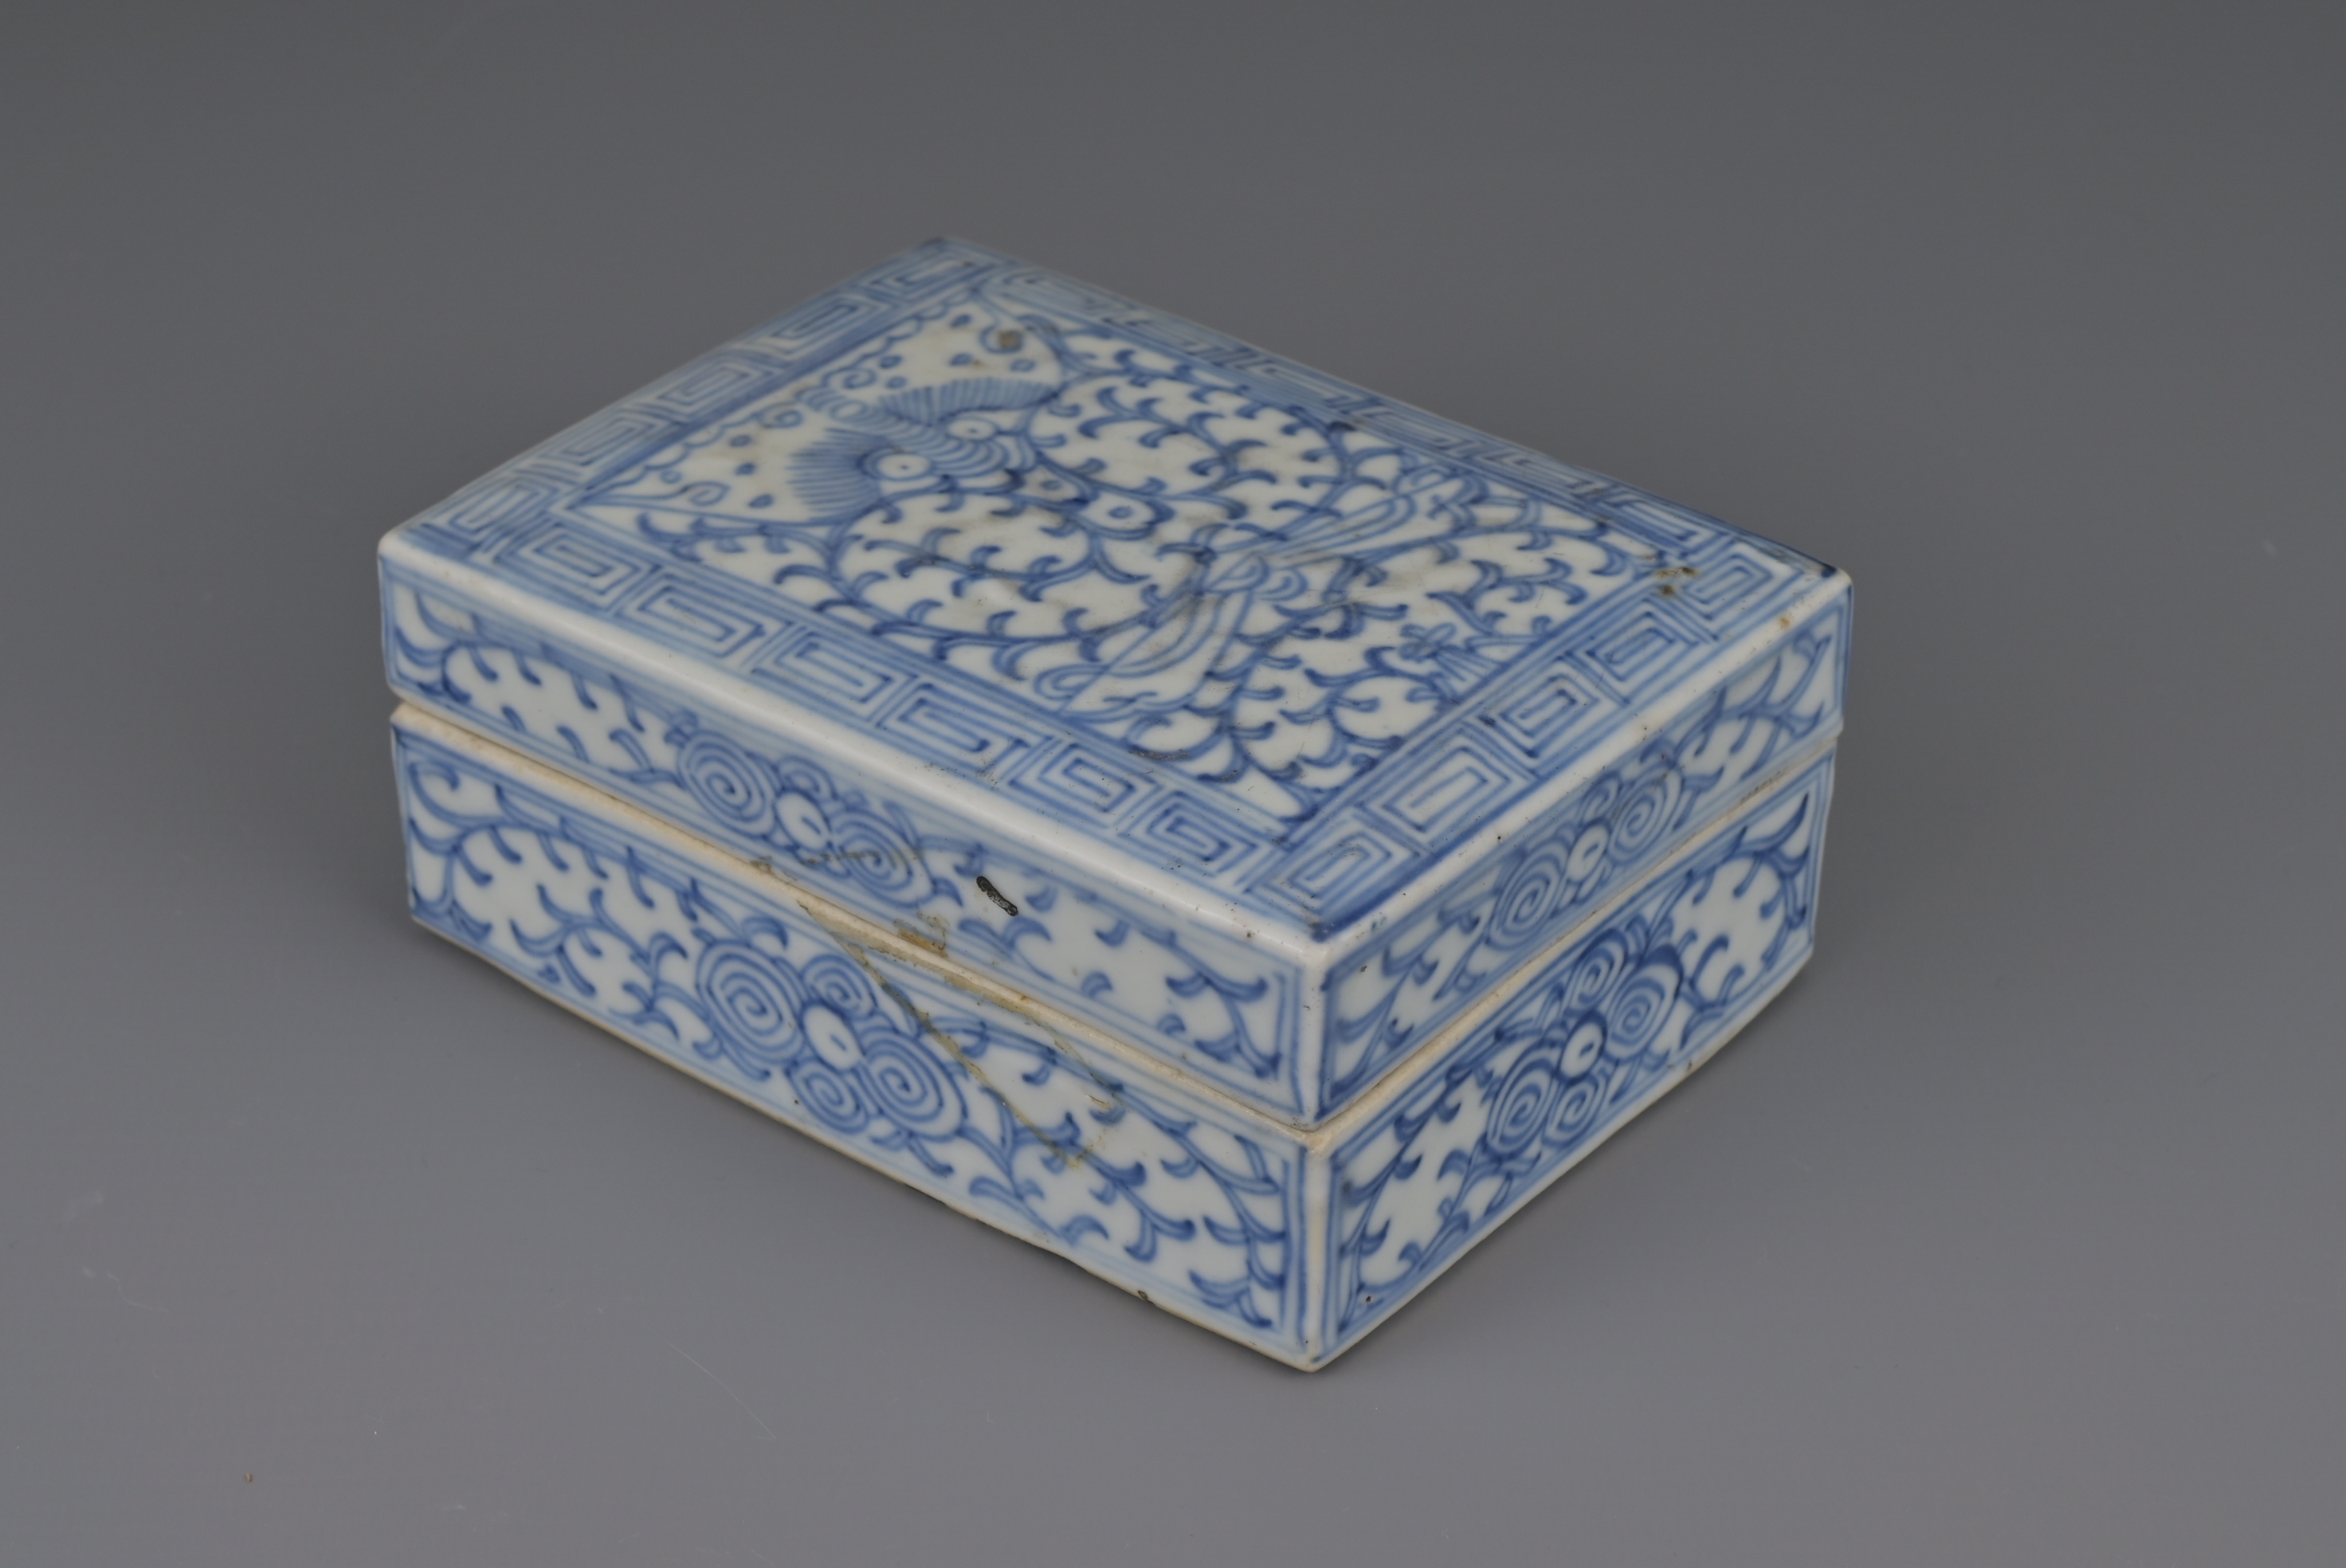 CHINESE BLUE AND WHITE PORCELAIN INK BOX AND COVER, JIAQING PERIOD, EARLY 19th CENTURY - Image 3 of 7